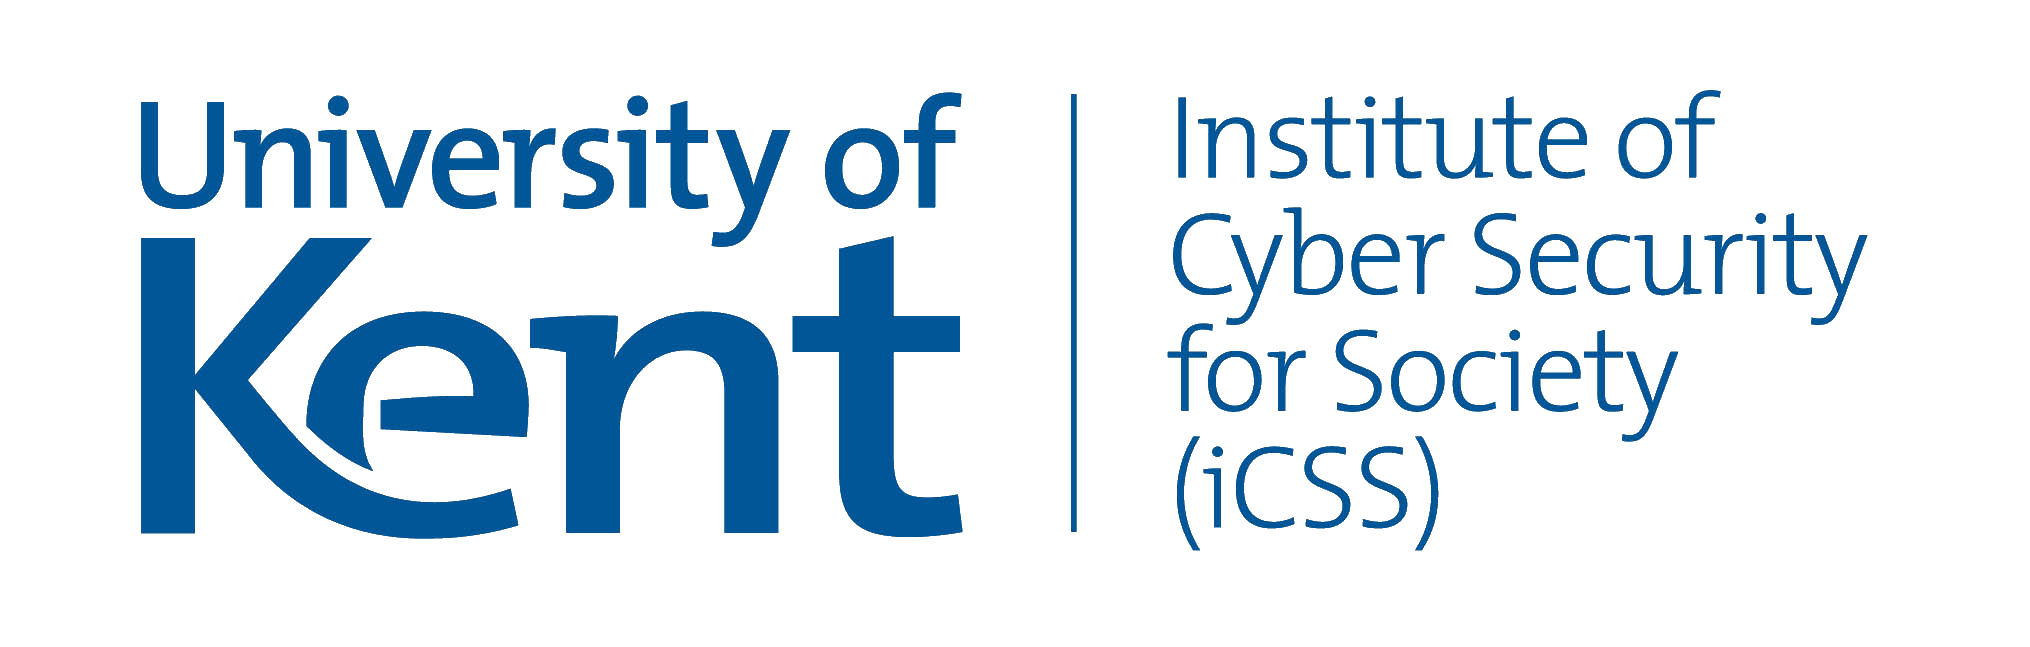 Institute of Cyber Security for Society (iCSS), University of Kent, Canterbury, UK